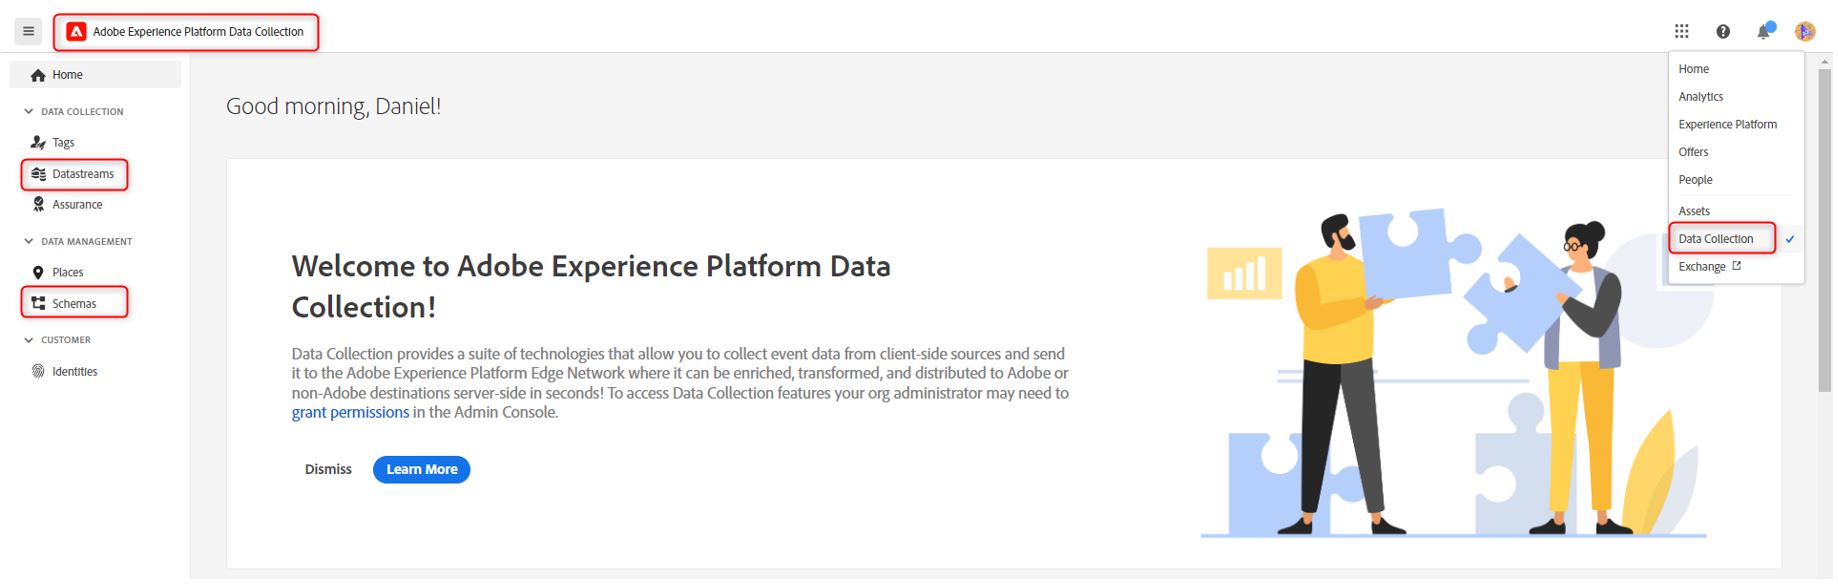 Adobe Experience Platform Data Collection